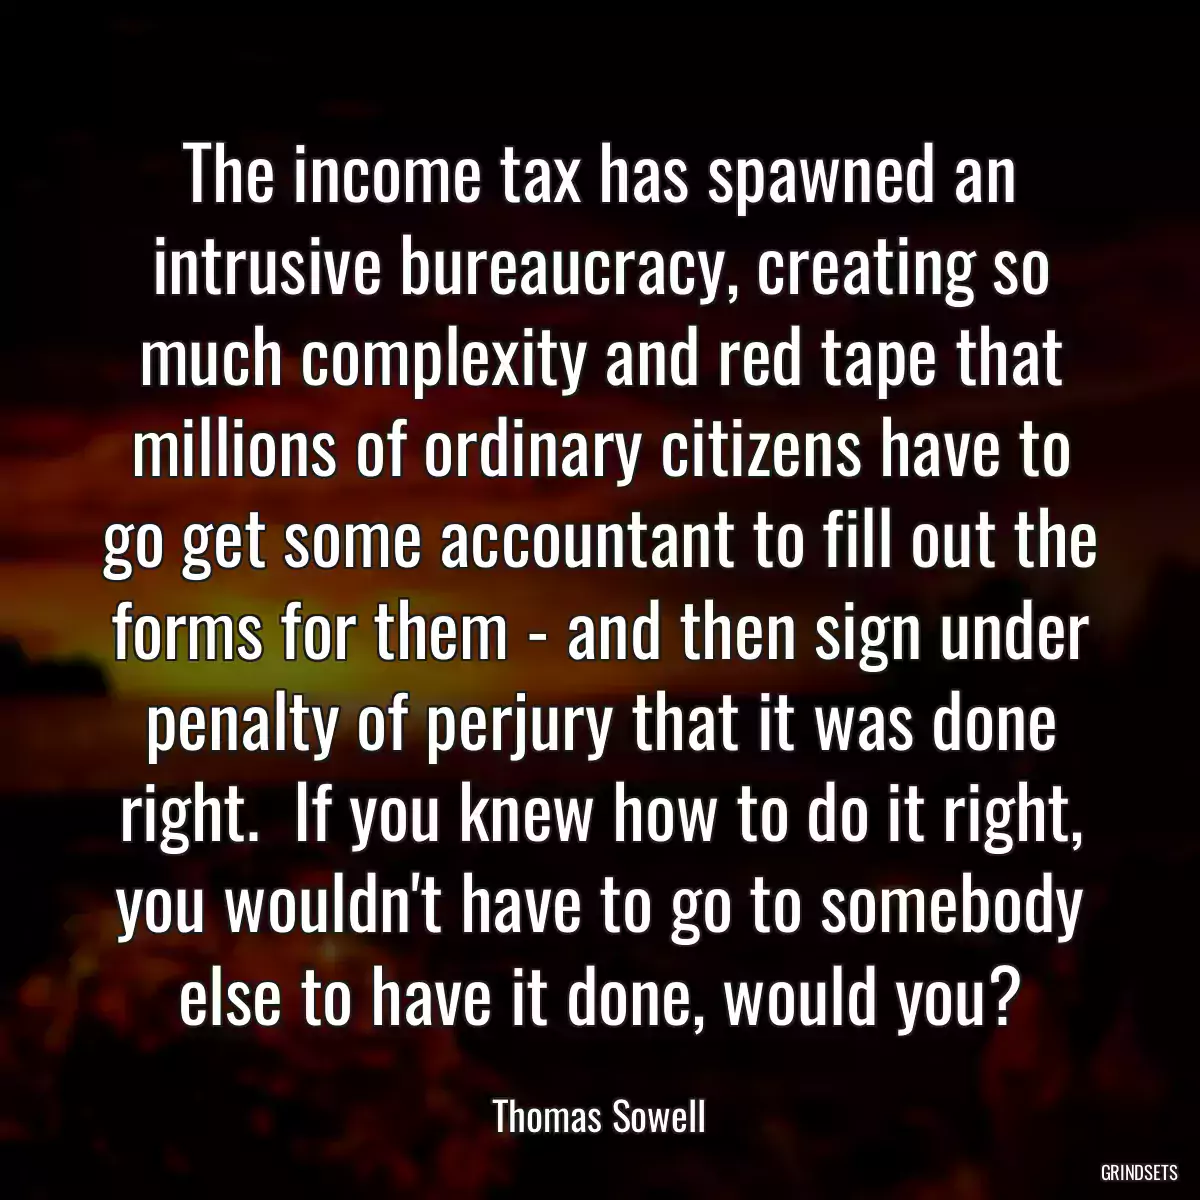 The income tax has spawned an intrusive bureaucracy, creating so much complexity and red tape that millions of ordinary citizens have to go get some accountant to fill out the forms for them - and then sign under penalty of perjury that it was done right.  If you knew how to do it right, you wouldn\'t have to go to somebody else to have it done, would you?